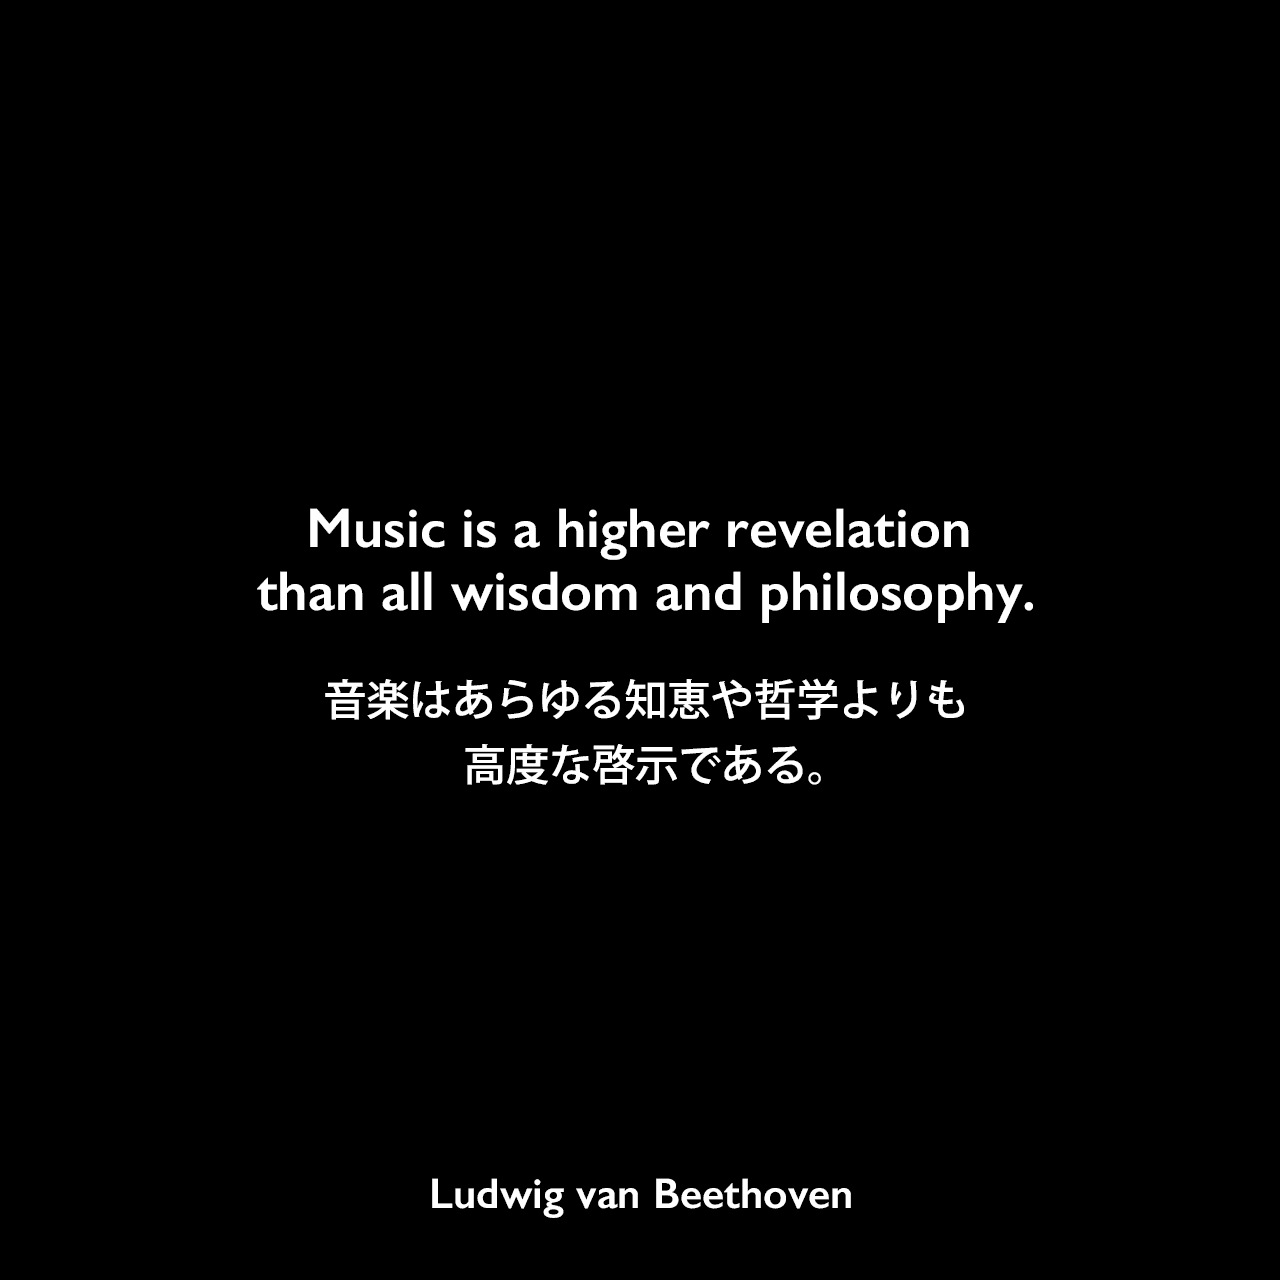 Music is a higher revelation than all wisdom and philosophy.音楽はあらゆる知恵や哲学よりも高度な啓示である。Ludwig van Beethoven